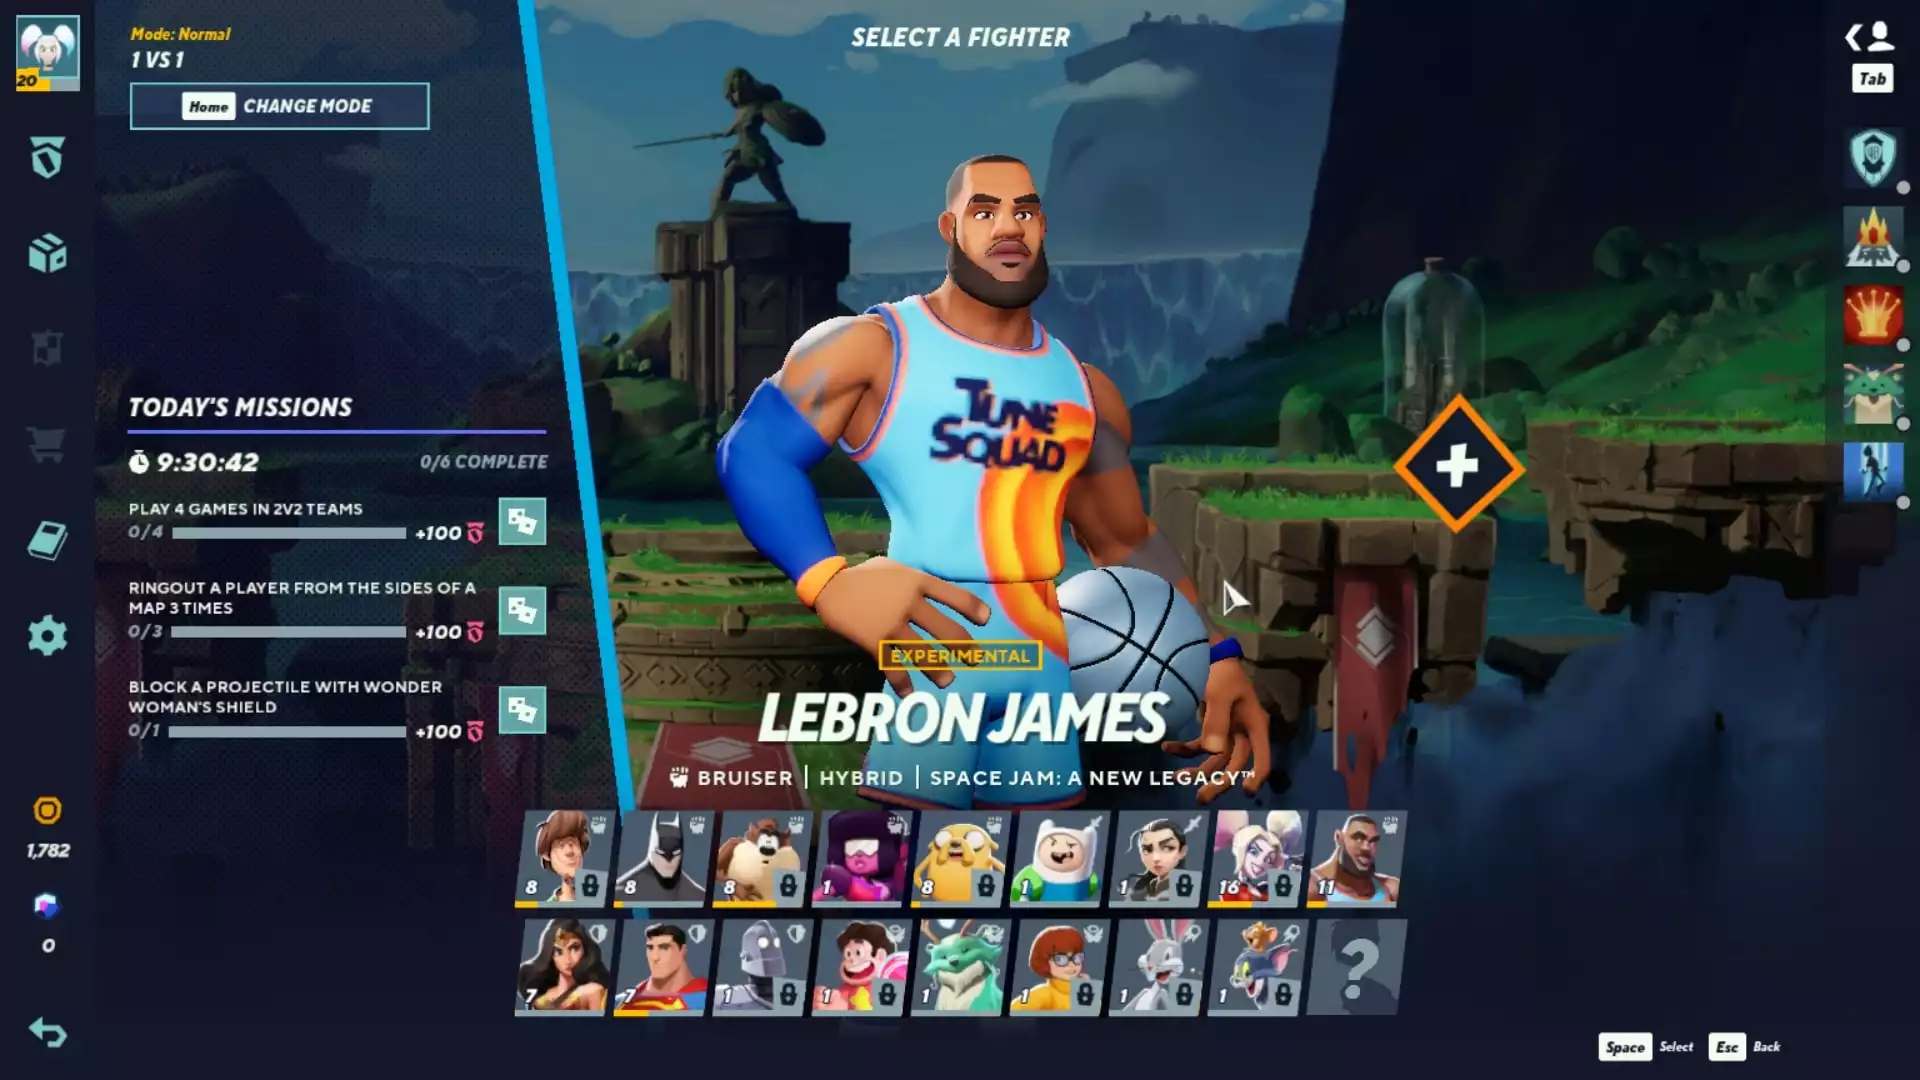 LeBron James is banned from Evo - at least in 'MultiVersus